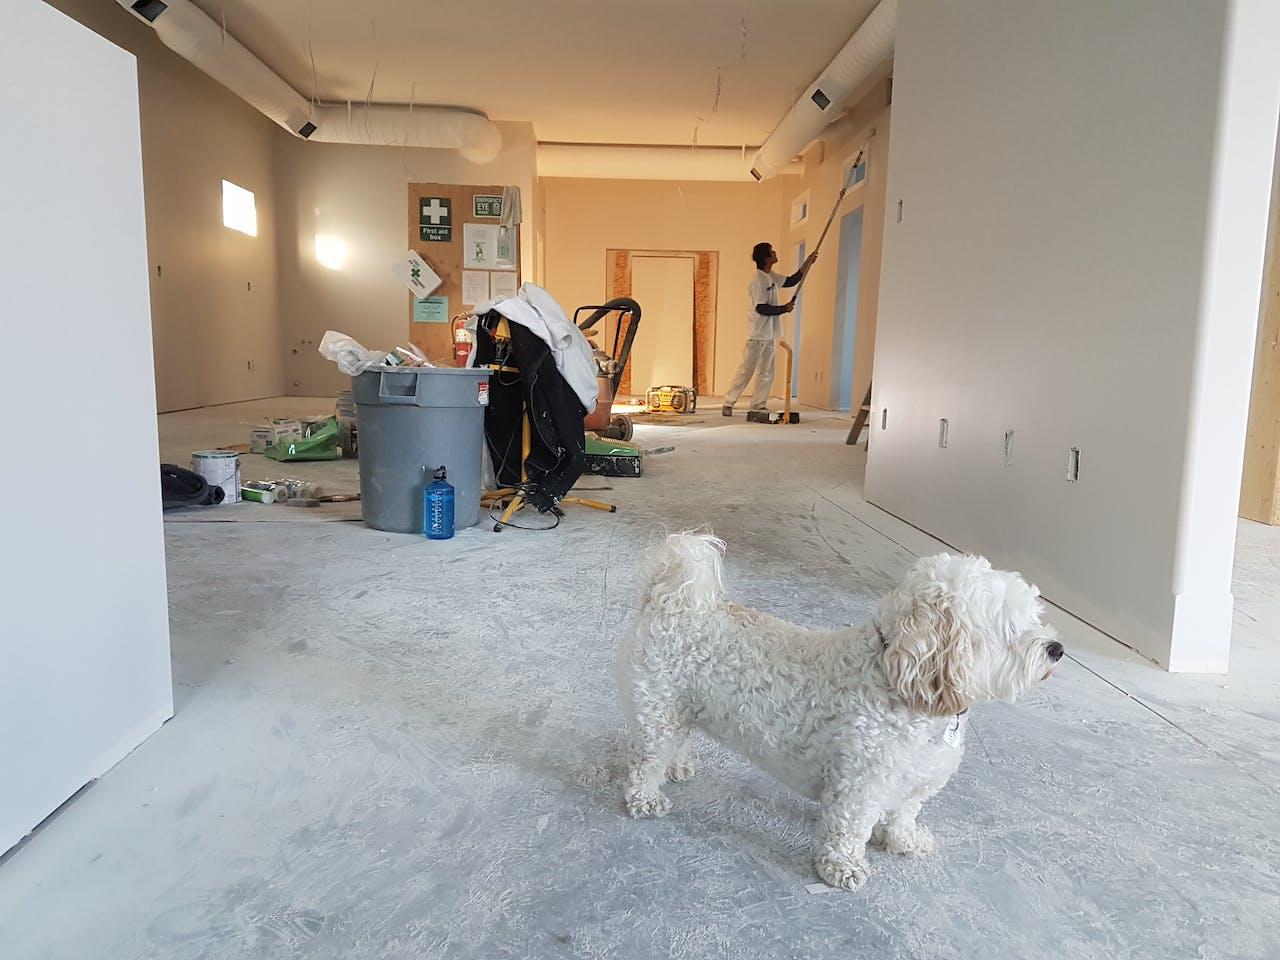 A dog standing on the floor in a room with people in the background

Description automatically generated